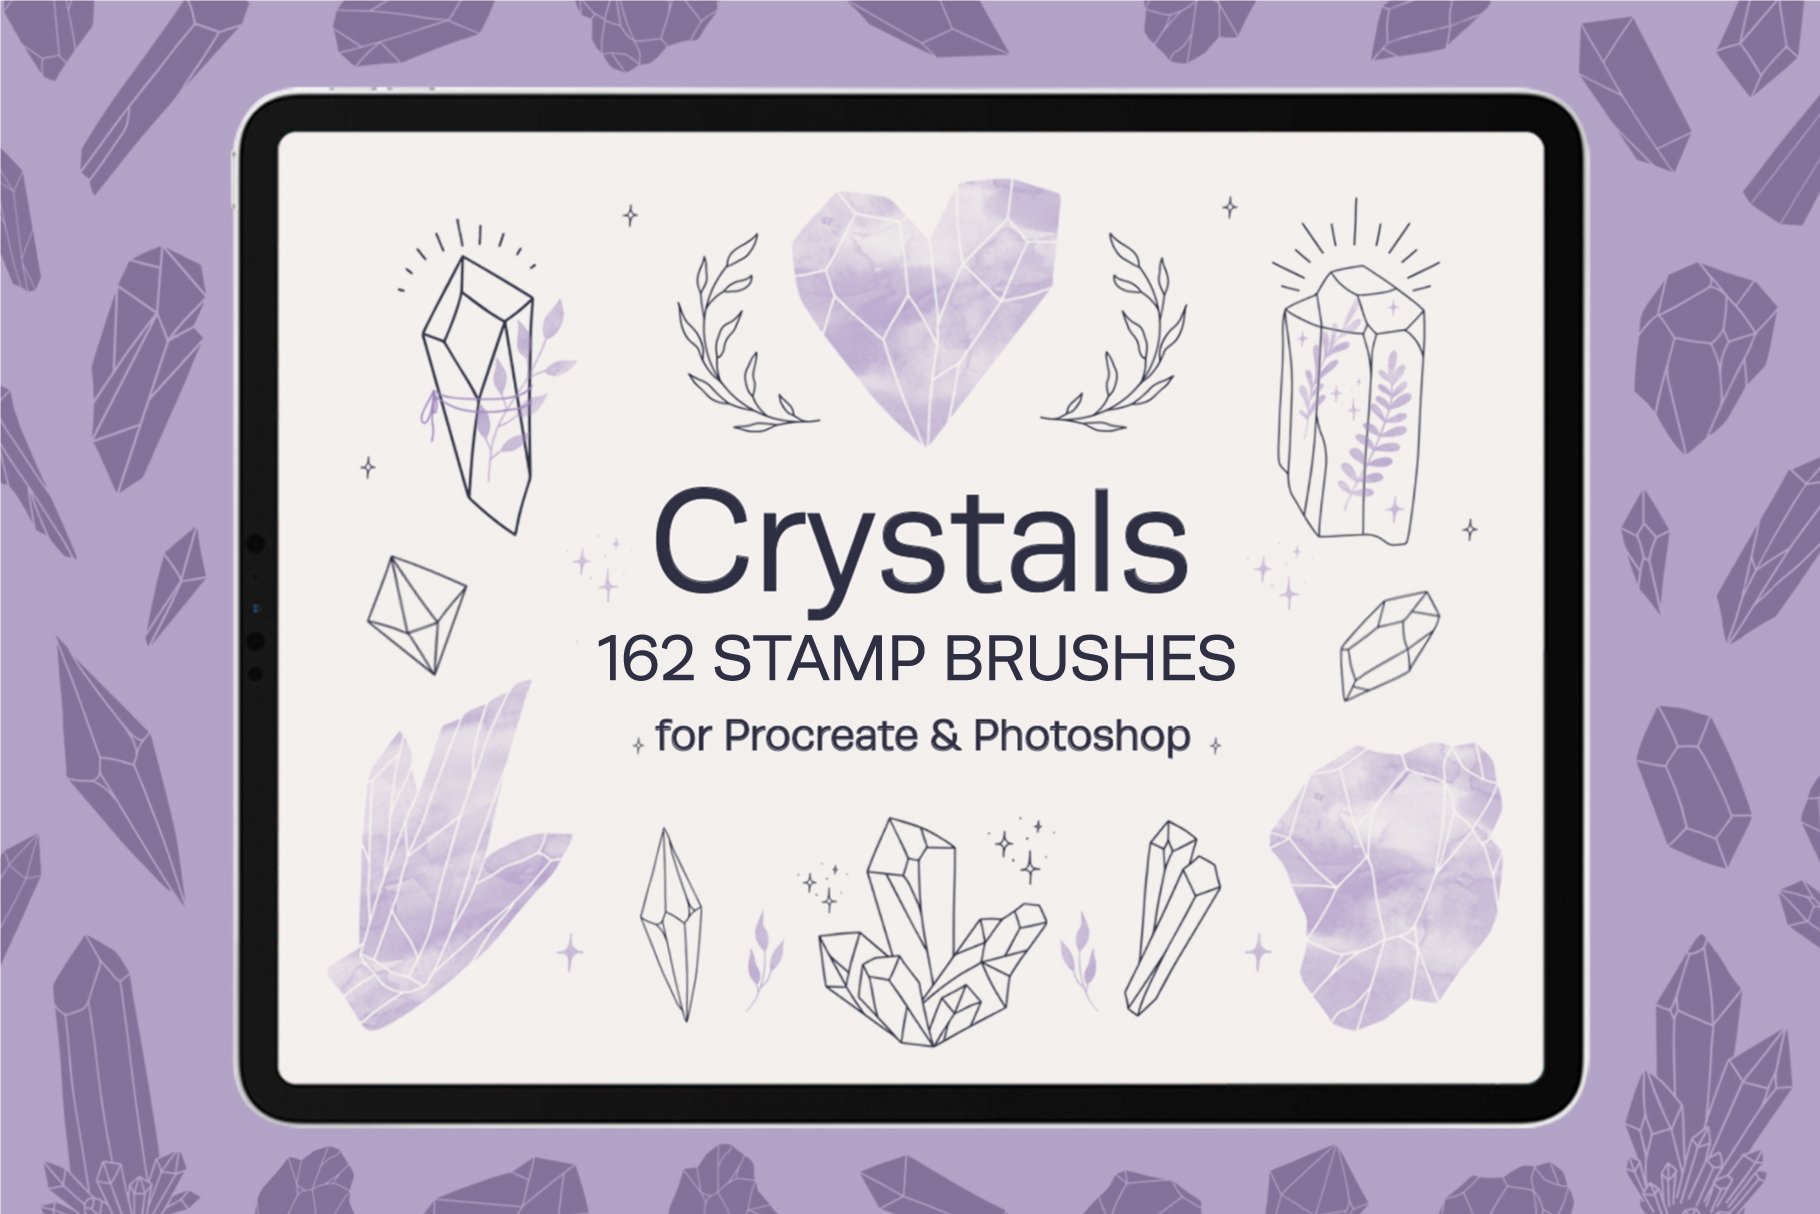 Crystals Stamp Brushes for Procreatecover image.